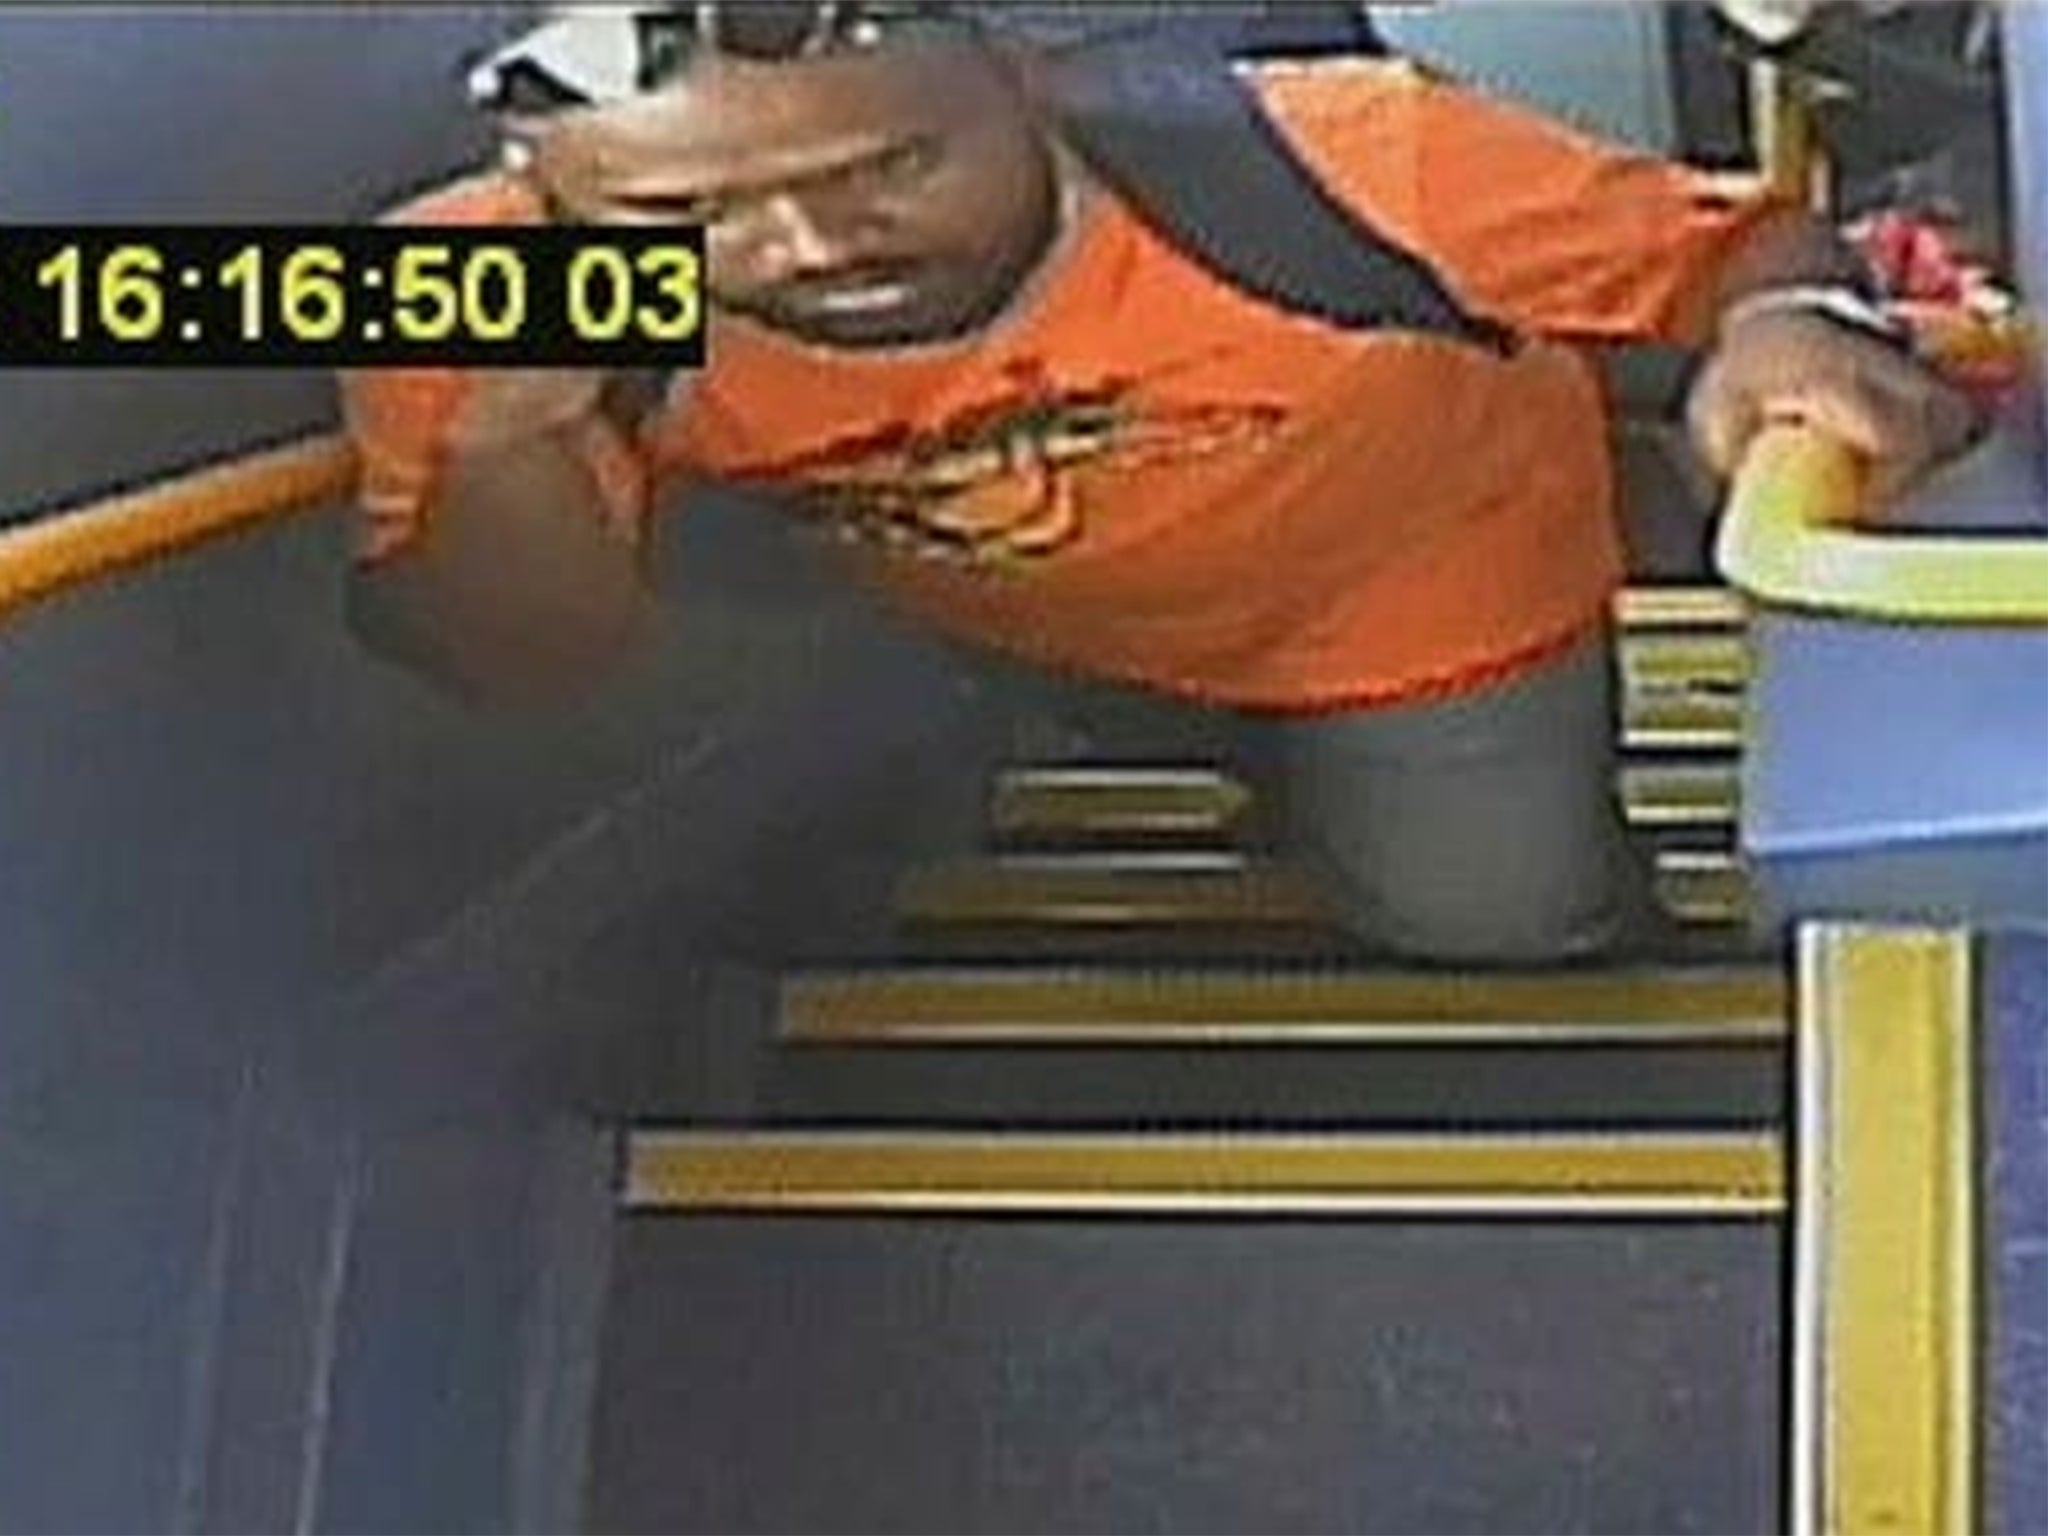 Police want to speak to this man after the incident in Hounslow